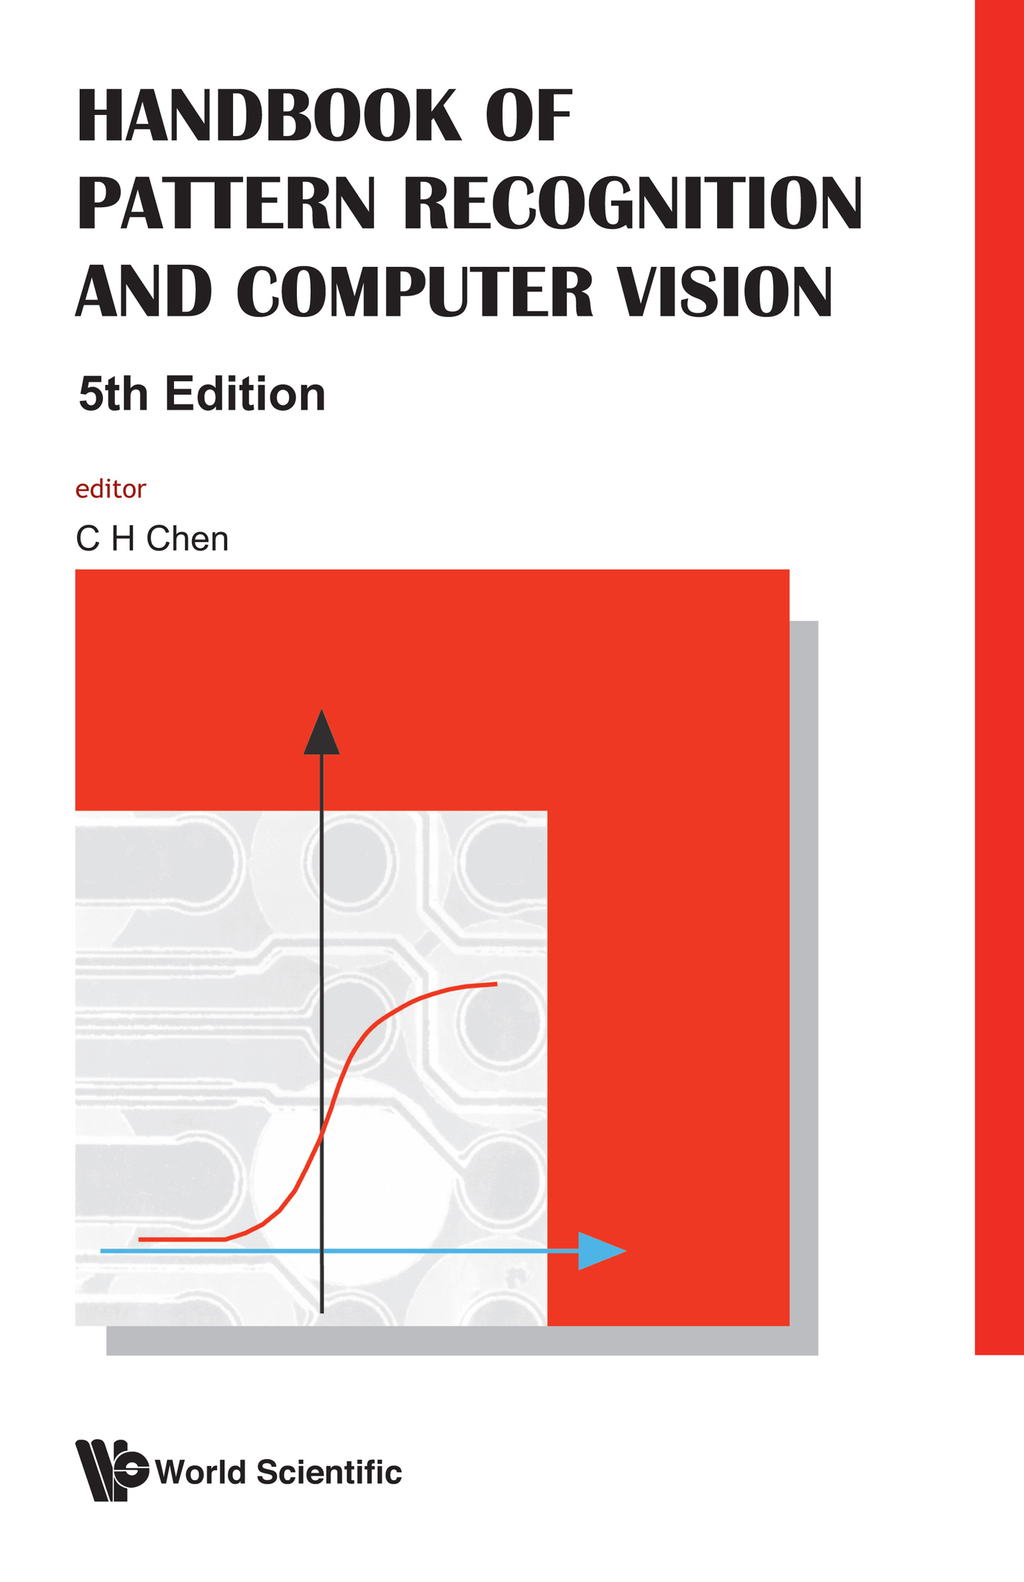 Handbook Of Pattern Recognition And Computer Vision (5th Edition) - 5th Edition (eBook)